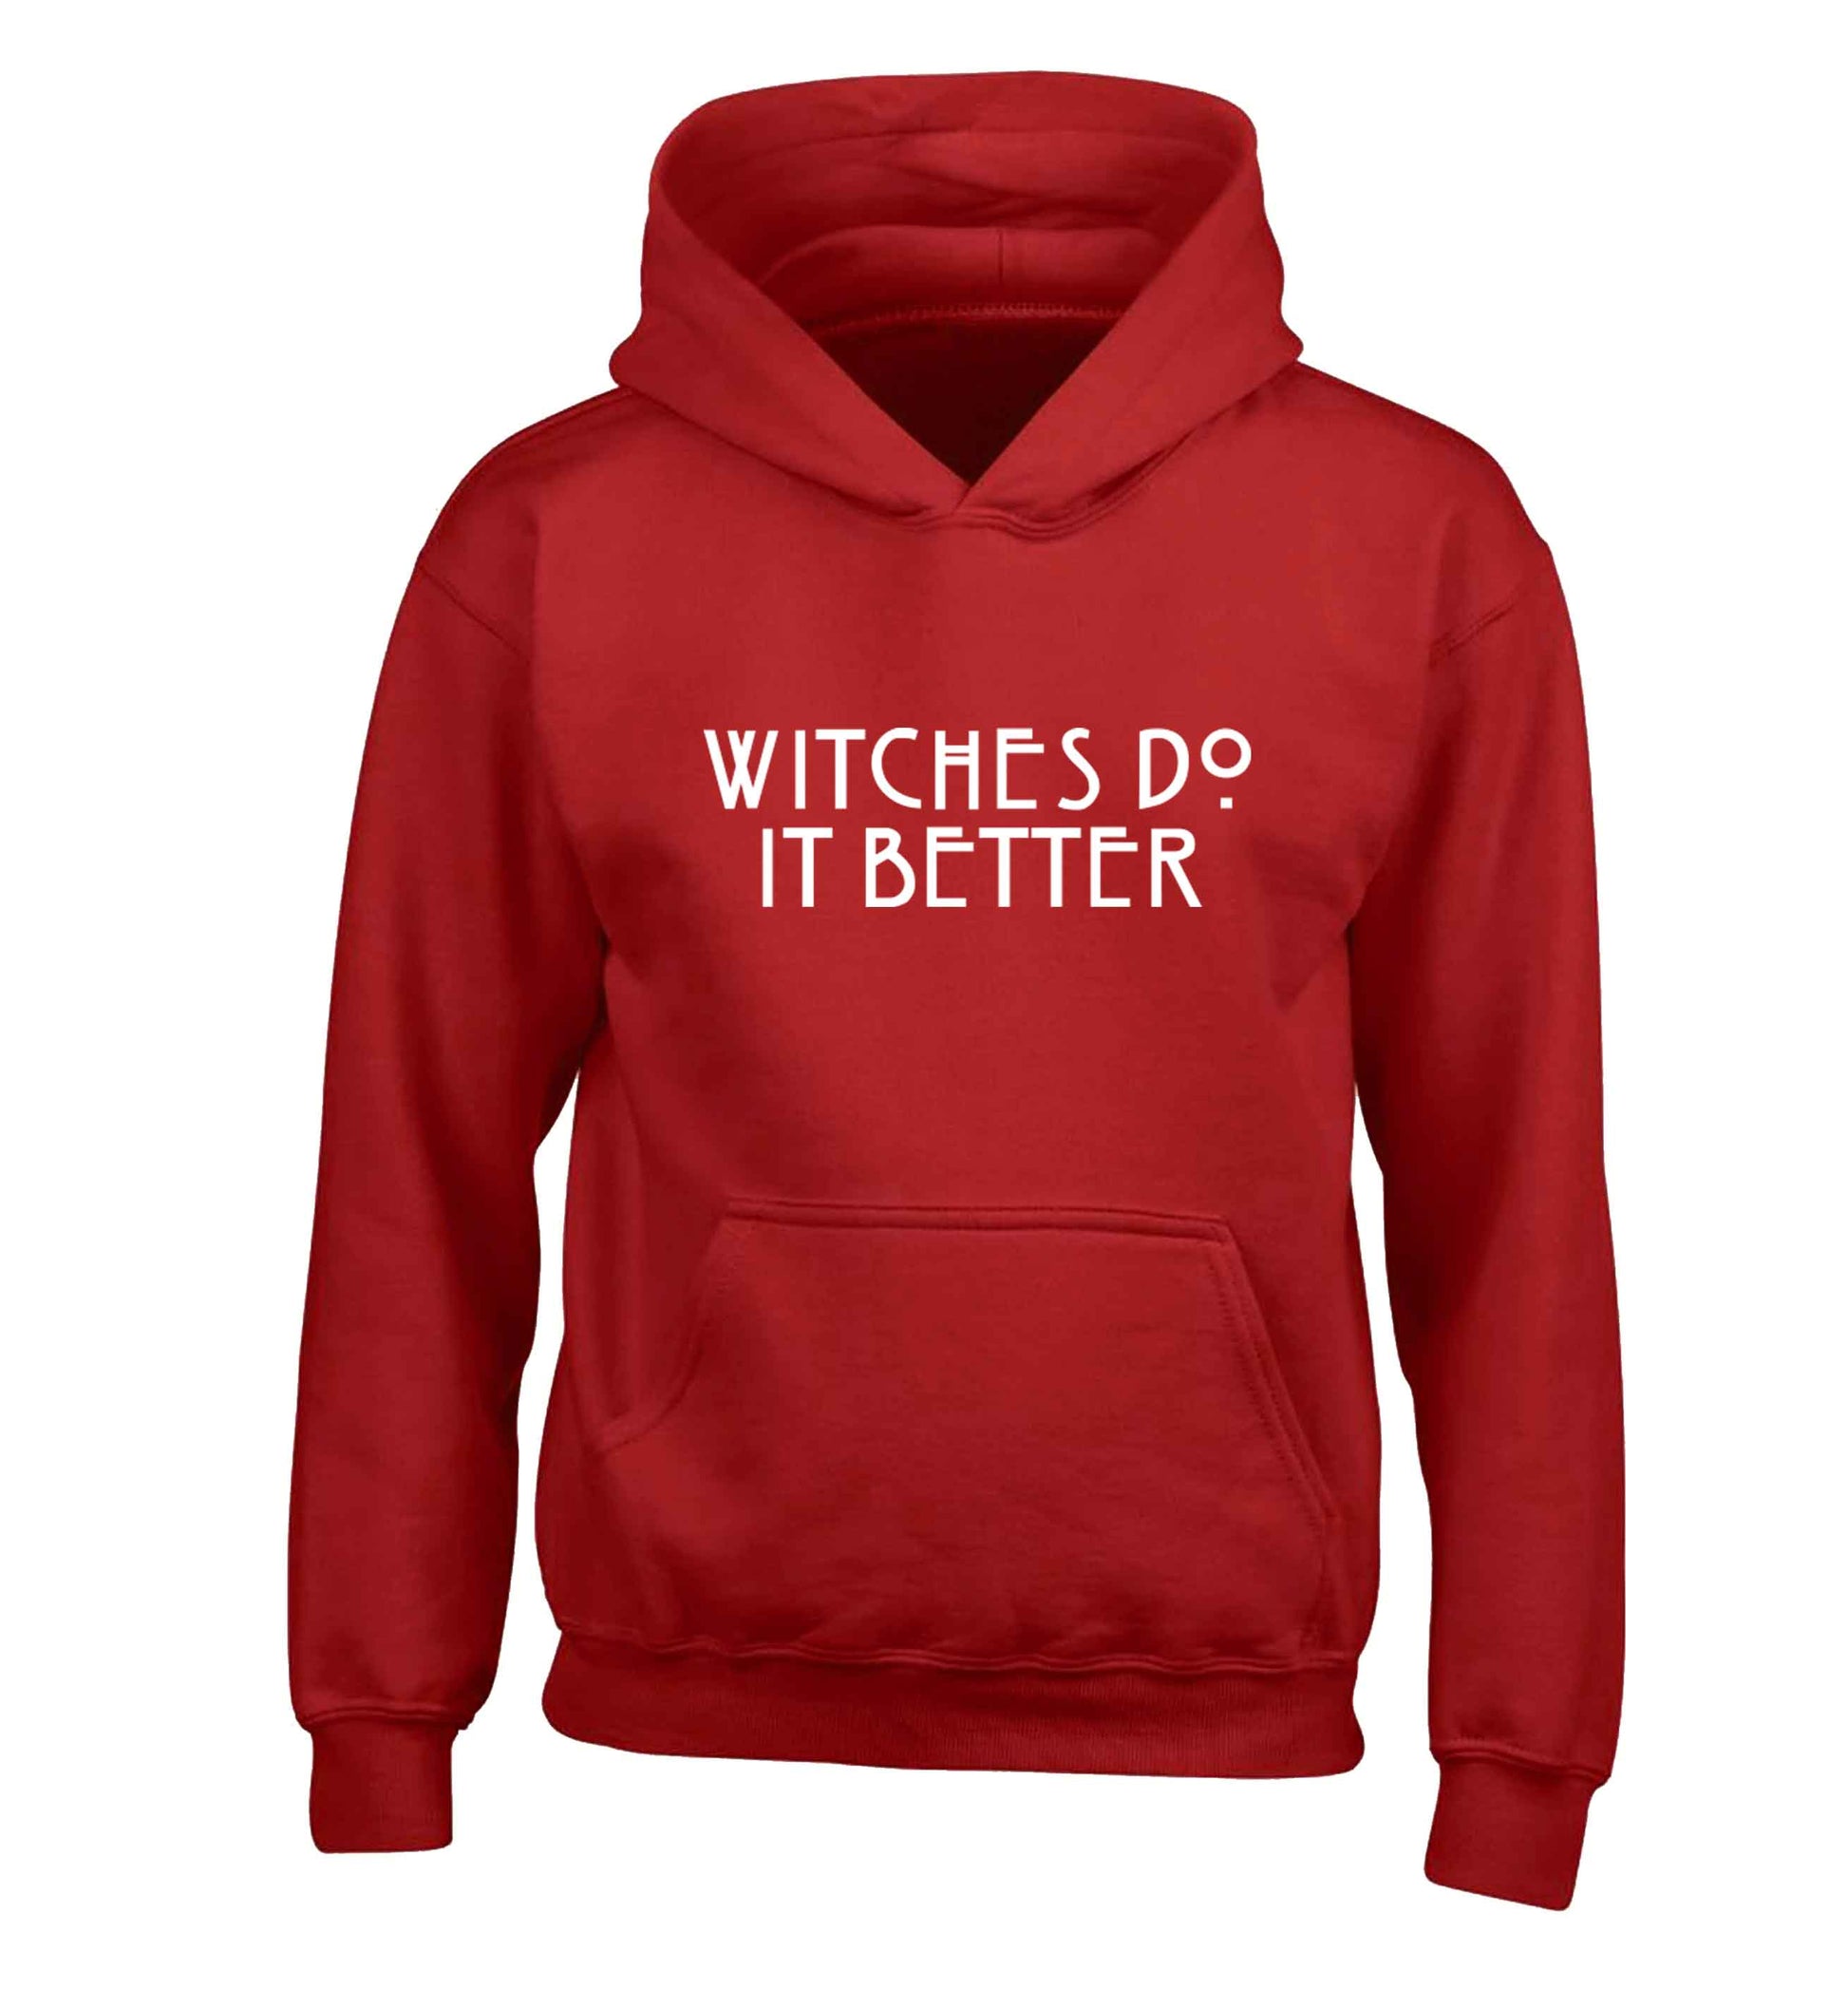 Witches do it better children's red hoodie 12-13 Years